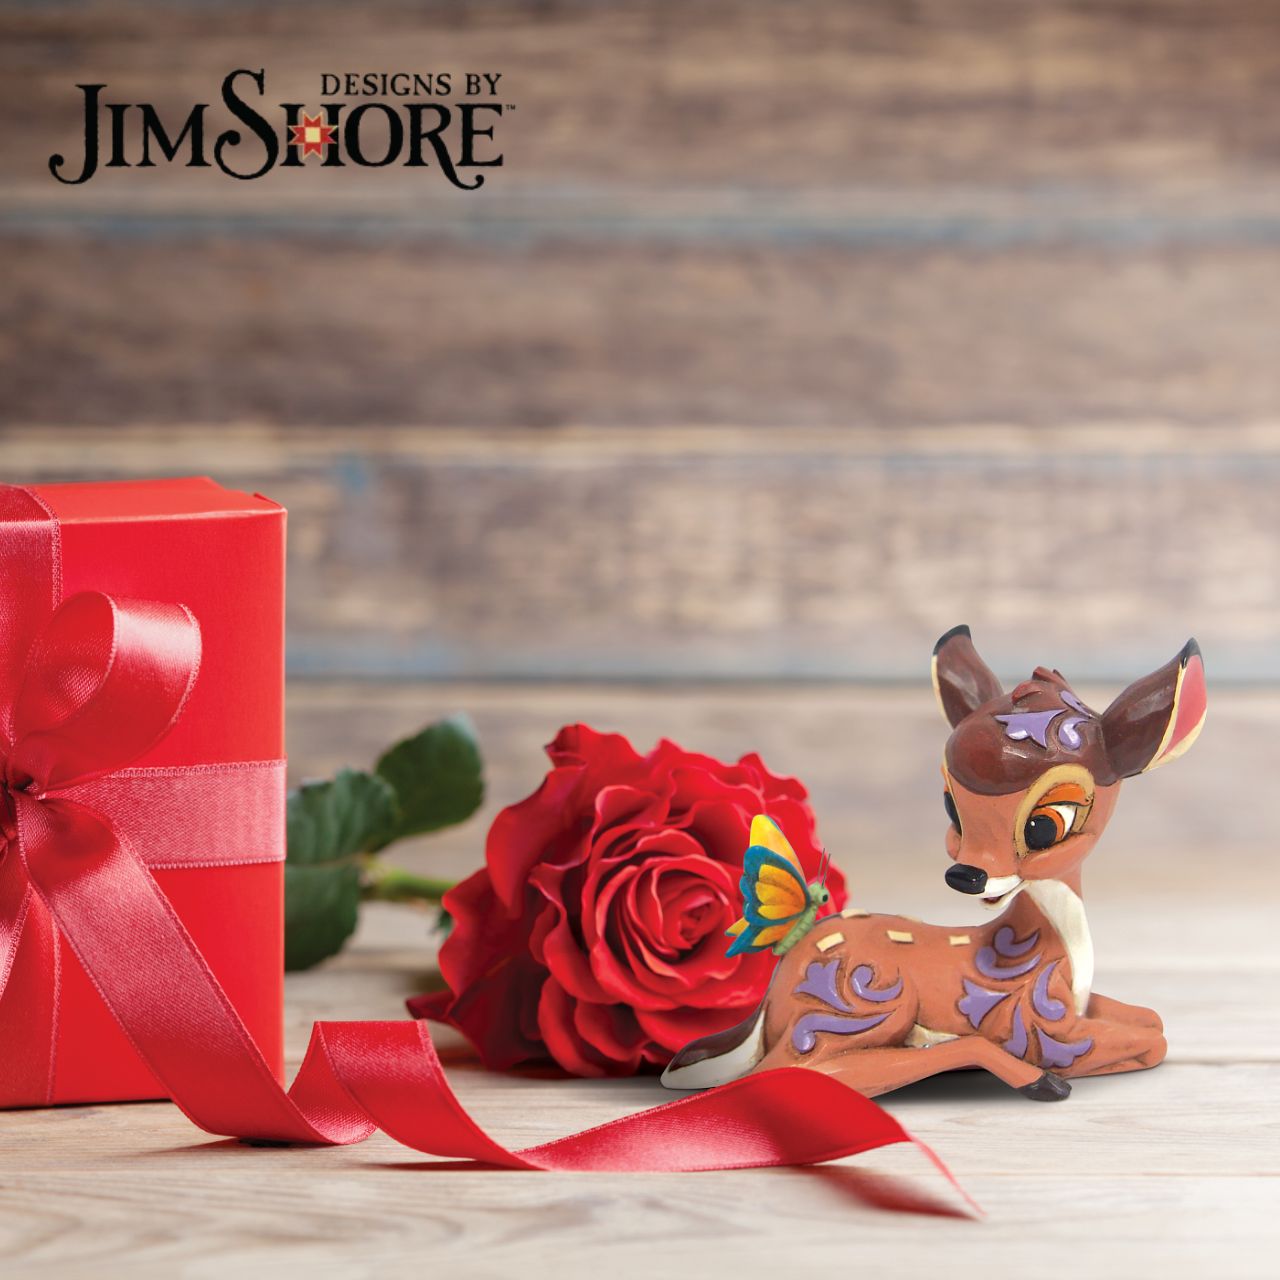 Disney Traditions Bambi Mini Figurine  With pleasing rosemaling detail and beautiful craftsmanship, this lovely Disney piece is a prize from the forest. Jim Shore celebrates the 80th anniversary of Bambi with this sweet miniature, as the peaceful deer sits gracefully with a butterfly.